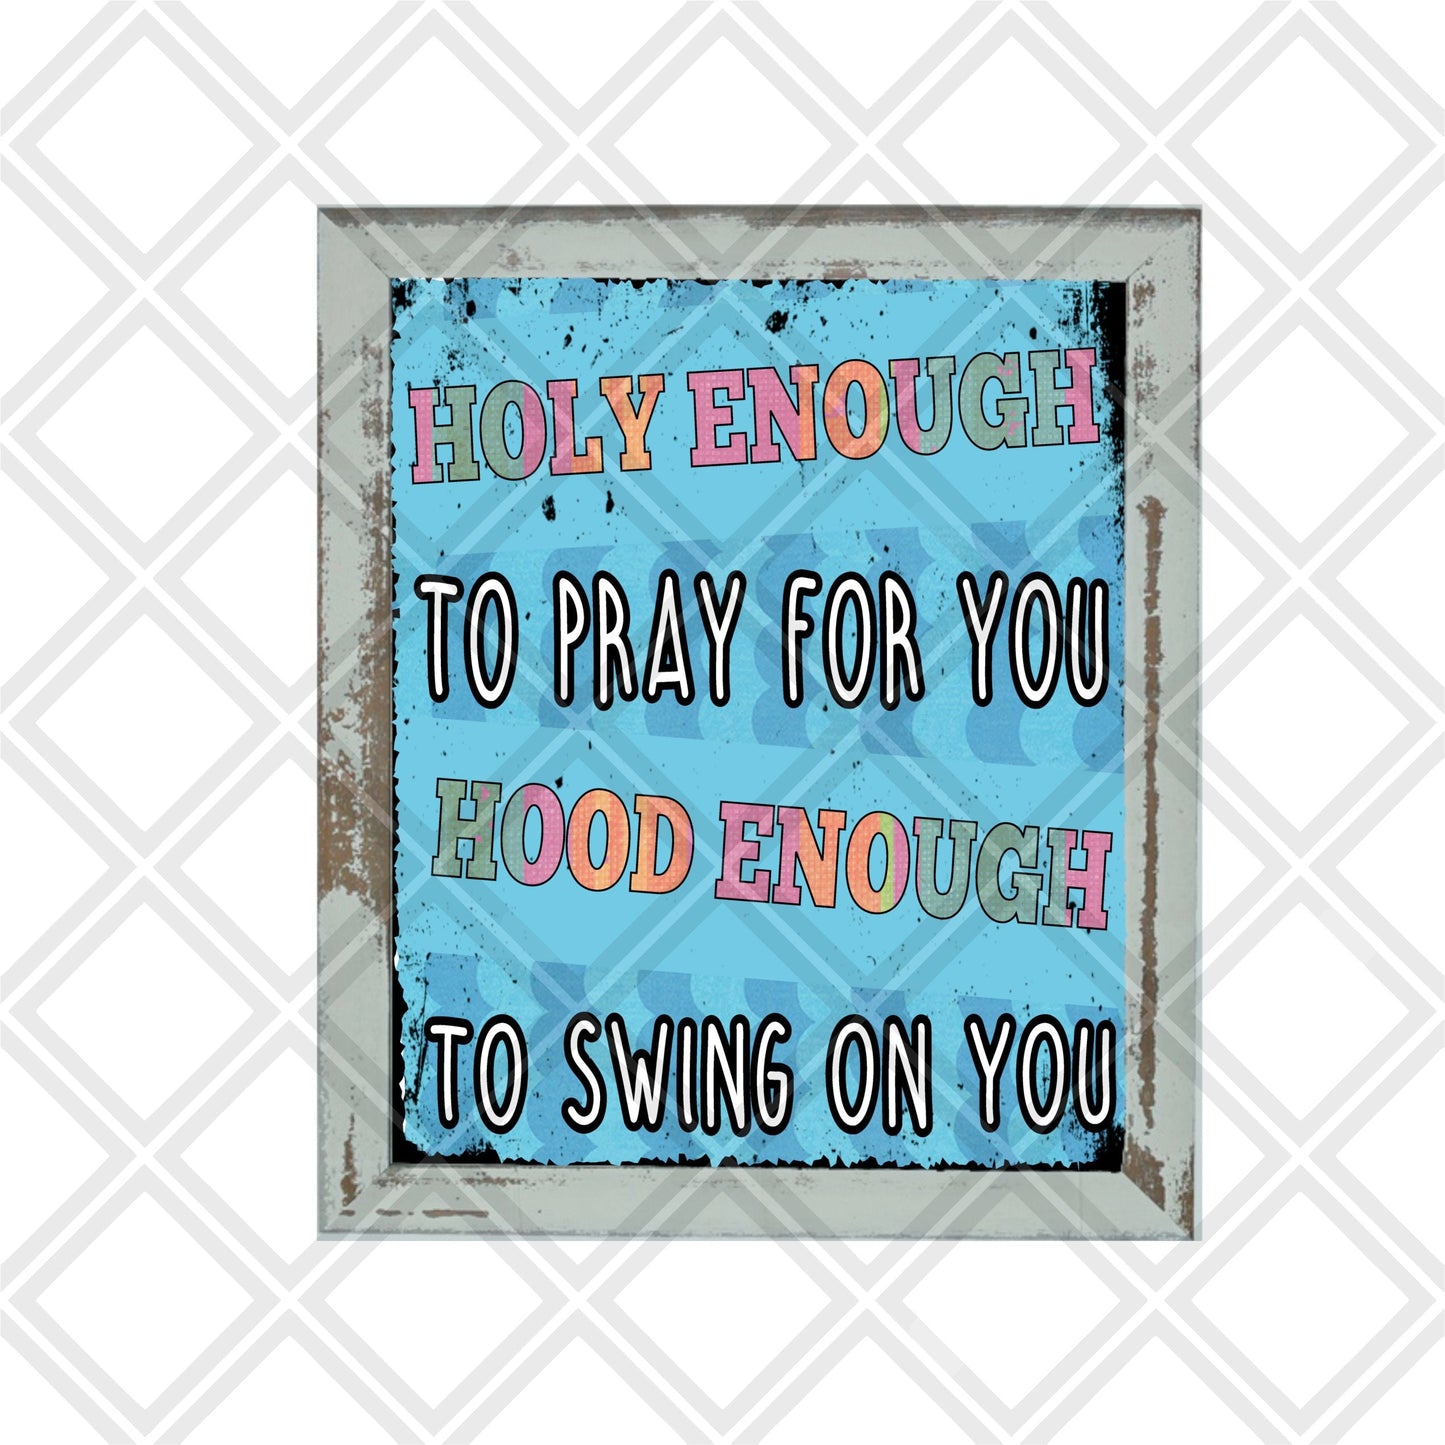 Holy enough to pray for you hood enough to swing on you png Digital Download Instand Download